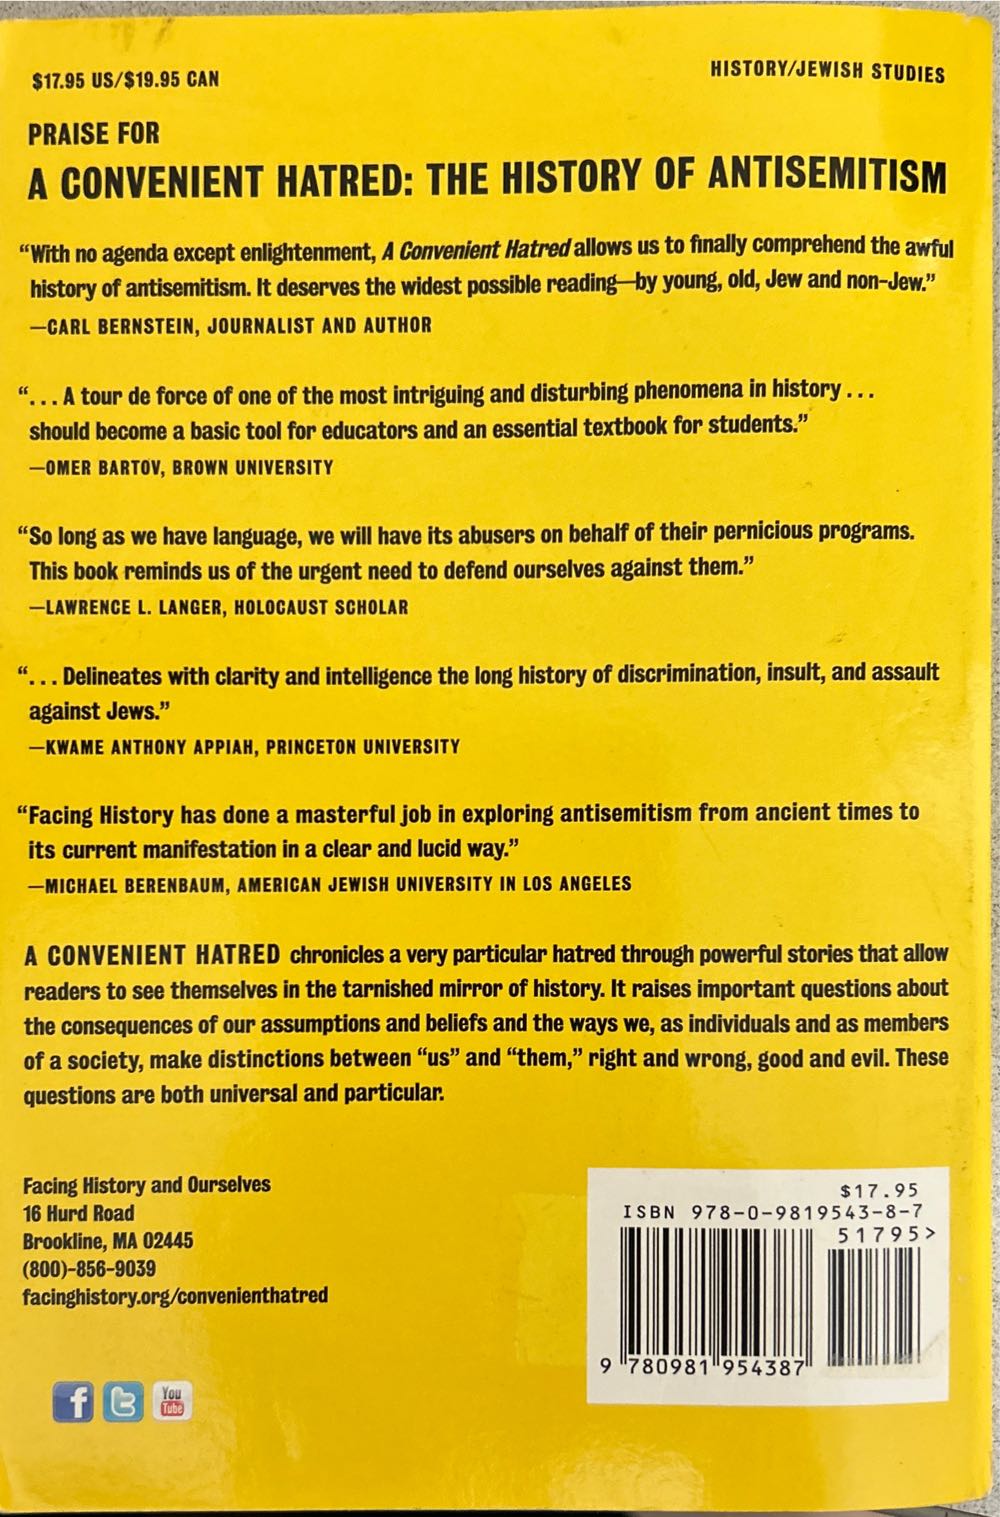 A Convenient Hatred - Phyllis Goldstein (Facing History & Ourselves National) book collectible [Barcode 9780981954387] - Main Image 2